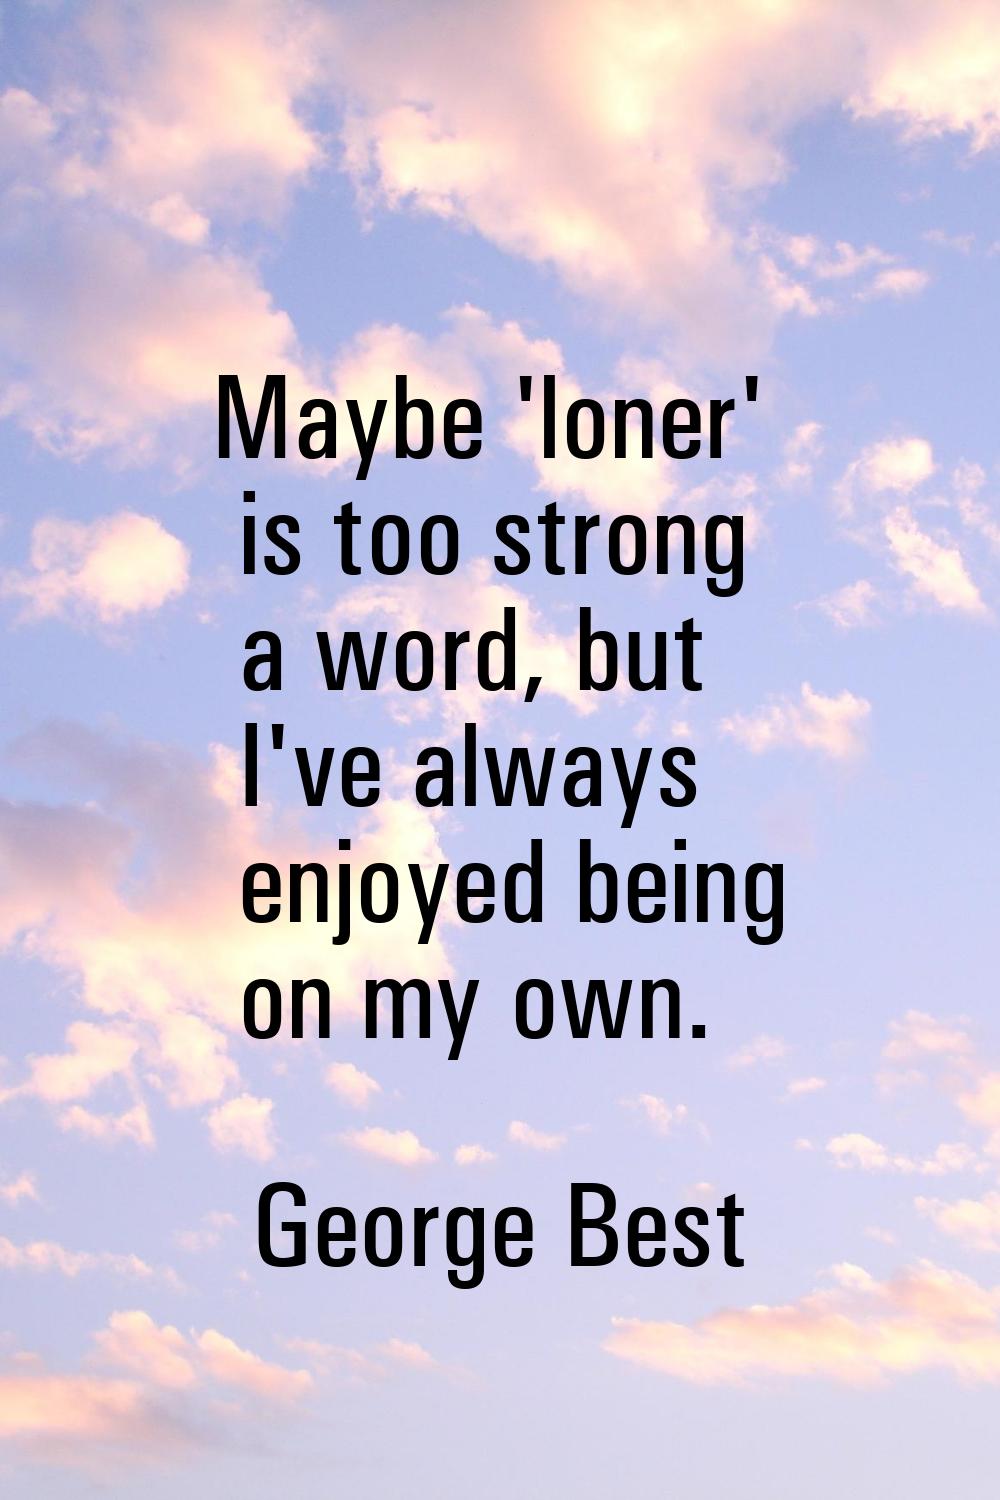 Maybe 'loner' is too strong a word, but I've always enjoyed being on my own.